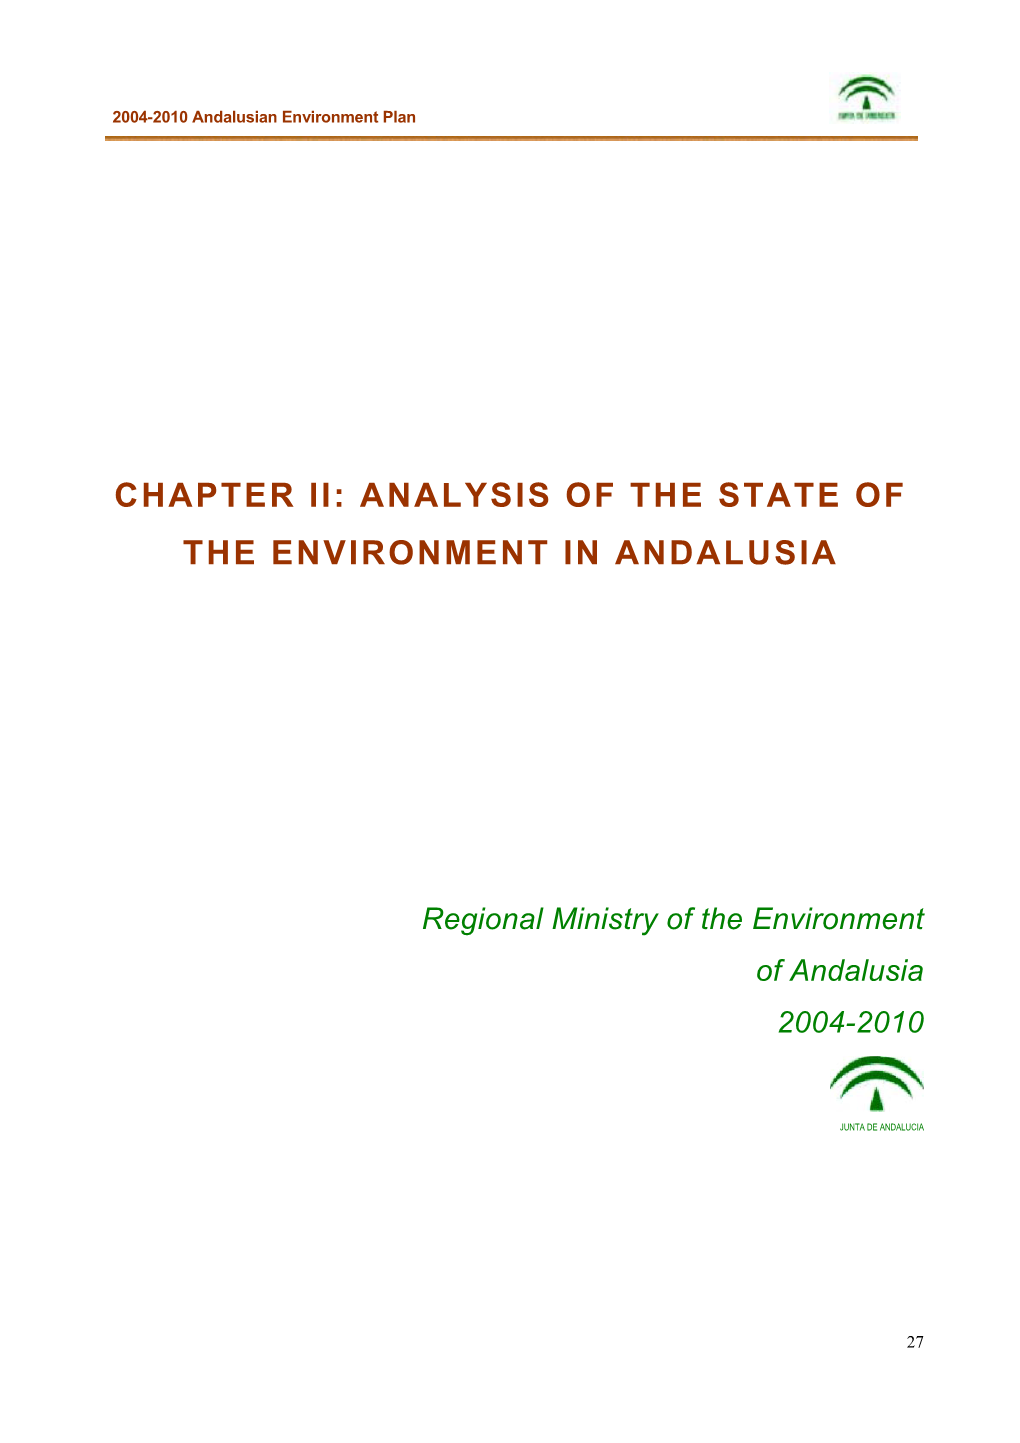 Chapter Ii: Analysis of the State of the Environment in Andalusia